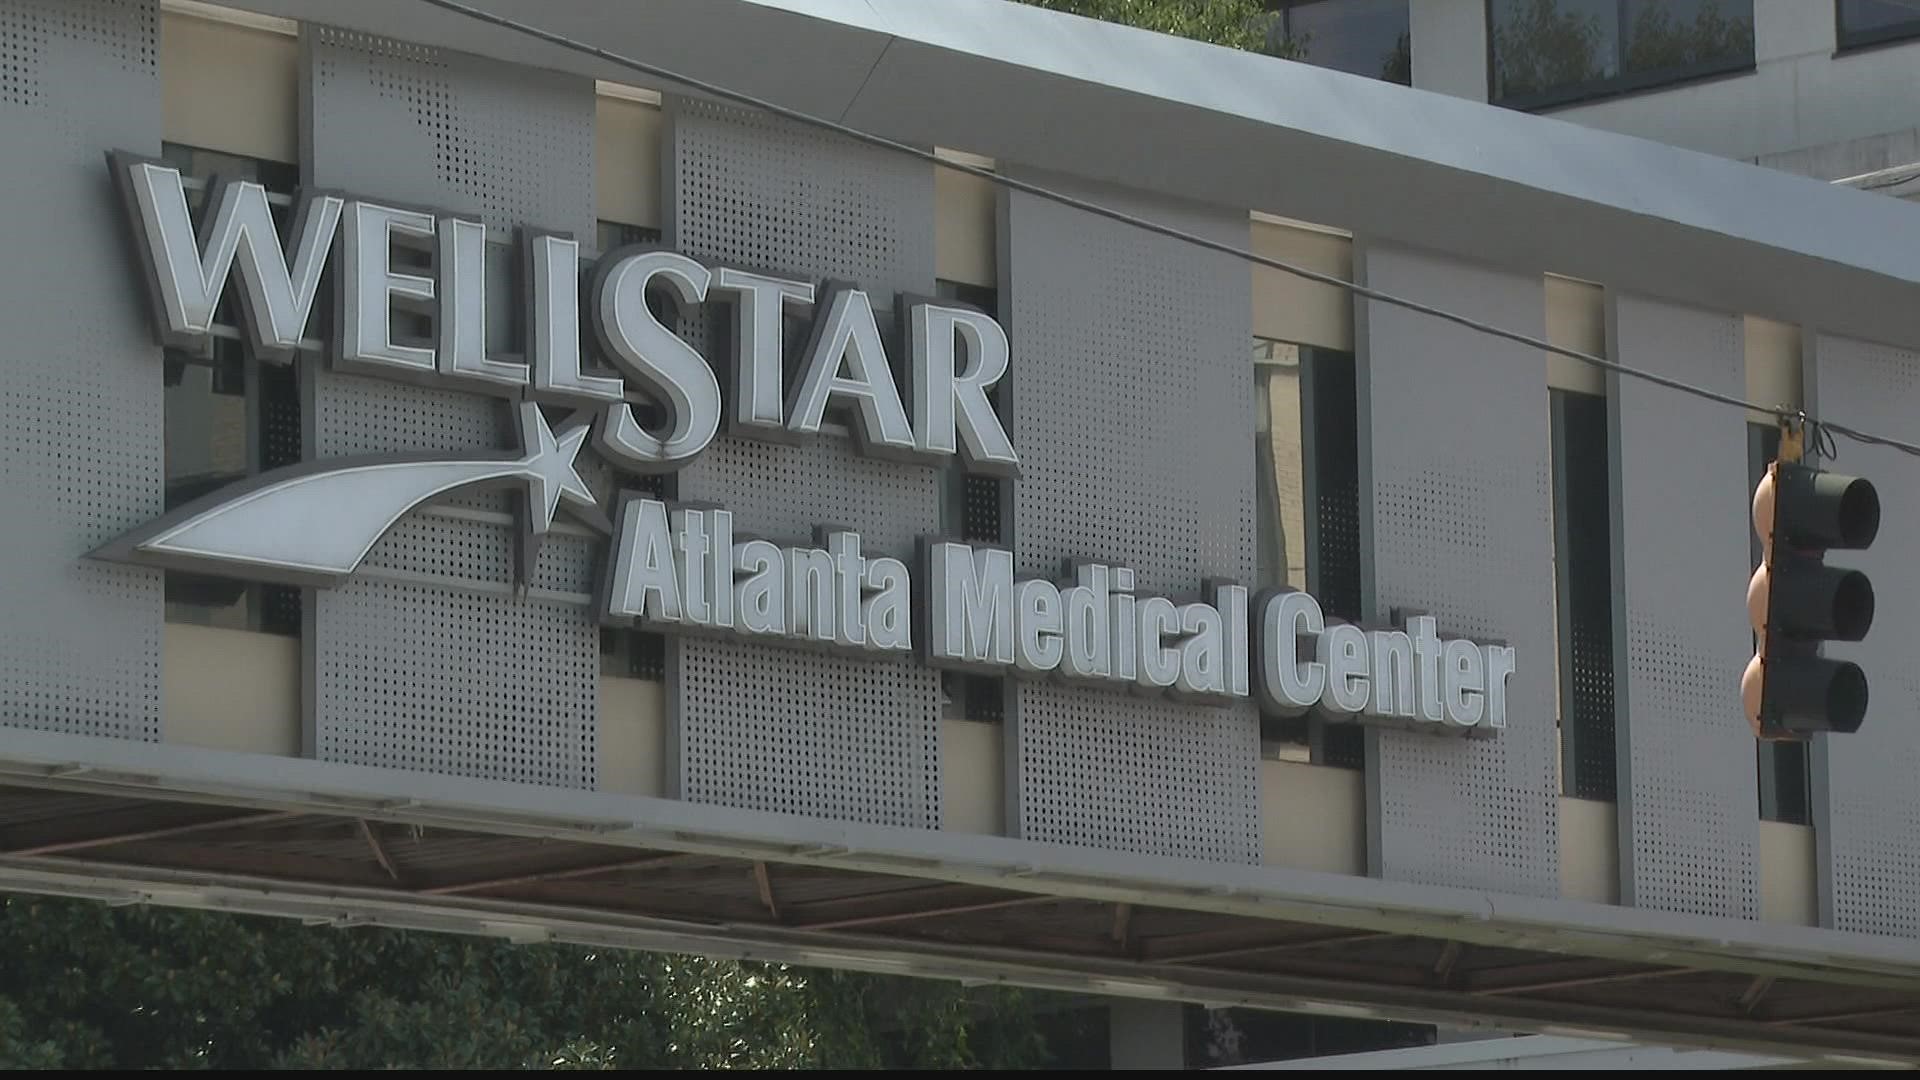 A former Wellstar employee said millions in metro Atlanta will be impacted by the hospital's closure.